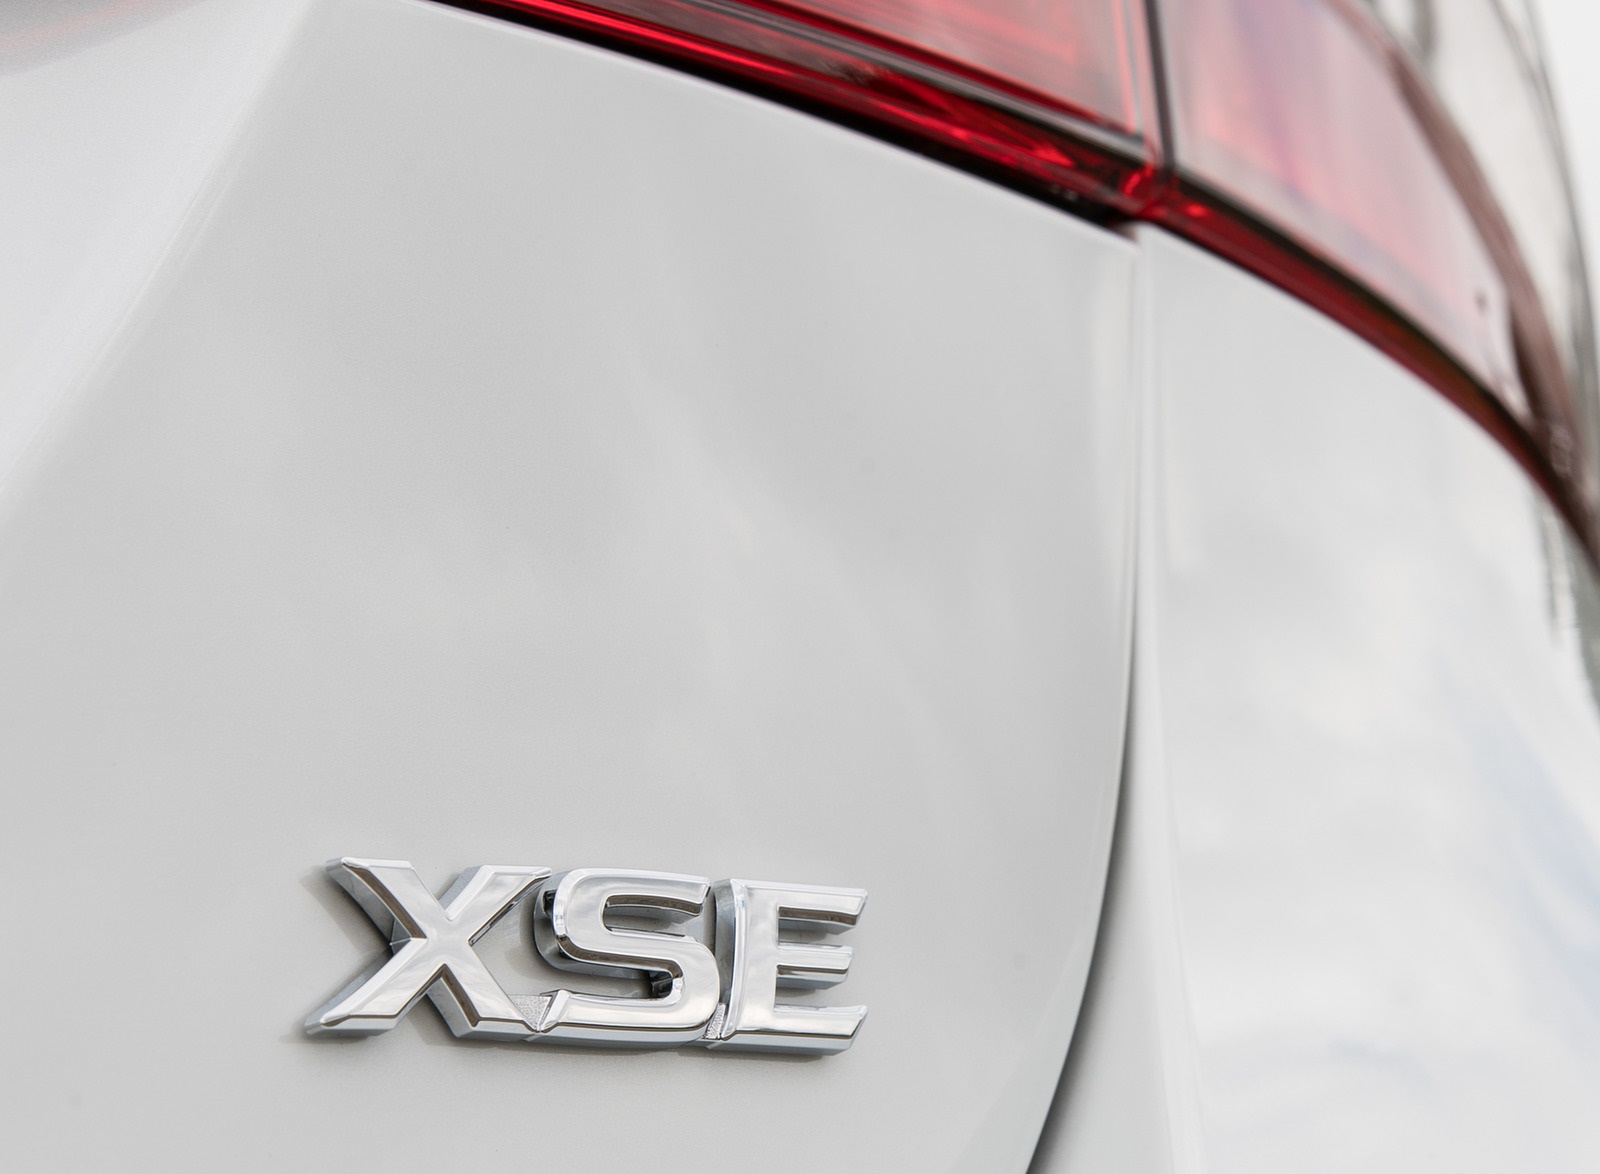 2018 Toyota Camry XSE Badge Wallpapers #61 of 65